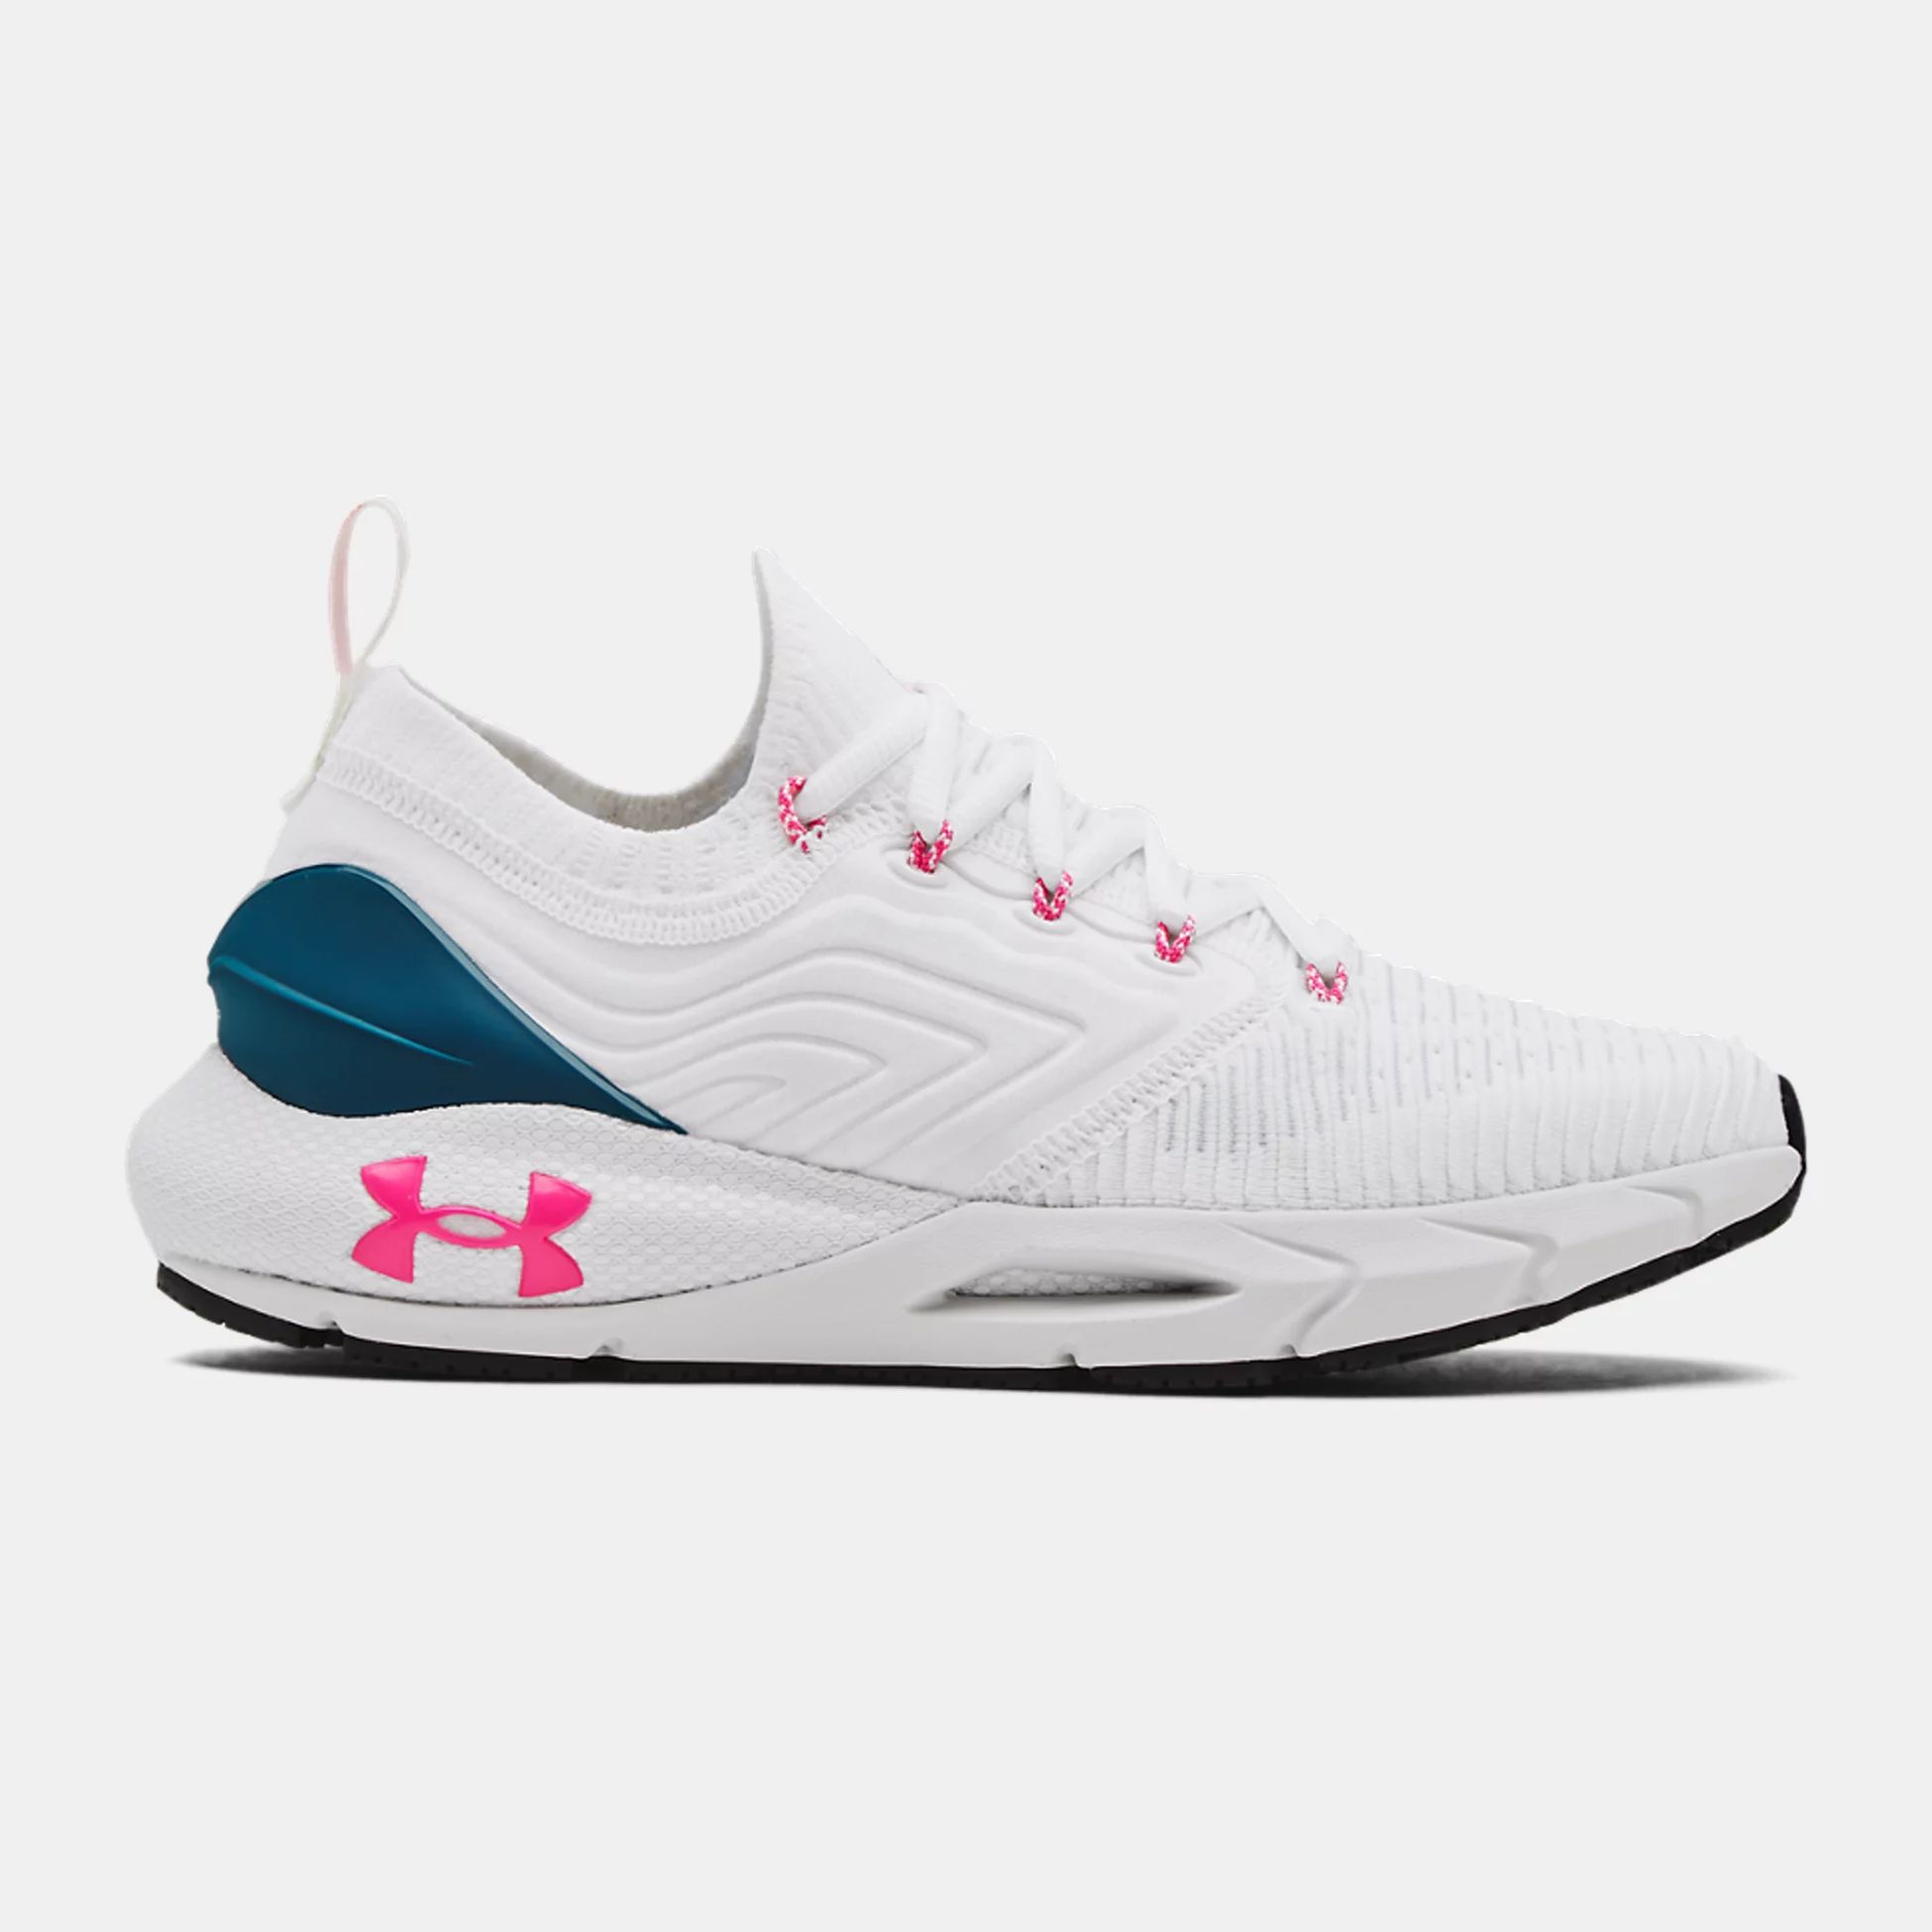 Running Shoes -  under armour UA HOVR Phantom 2 IntelliKnit Running Shoes